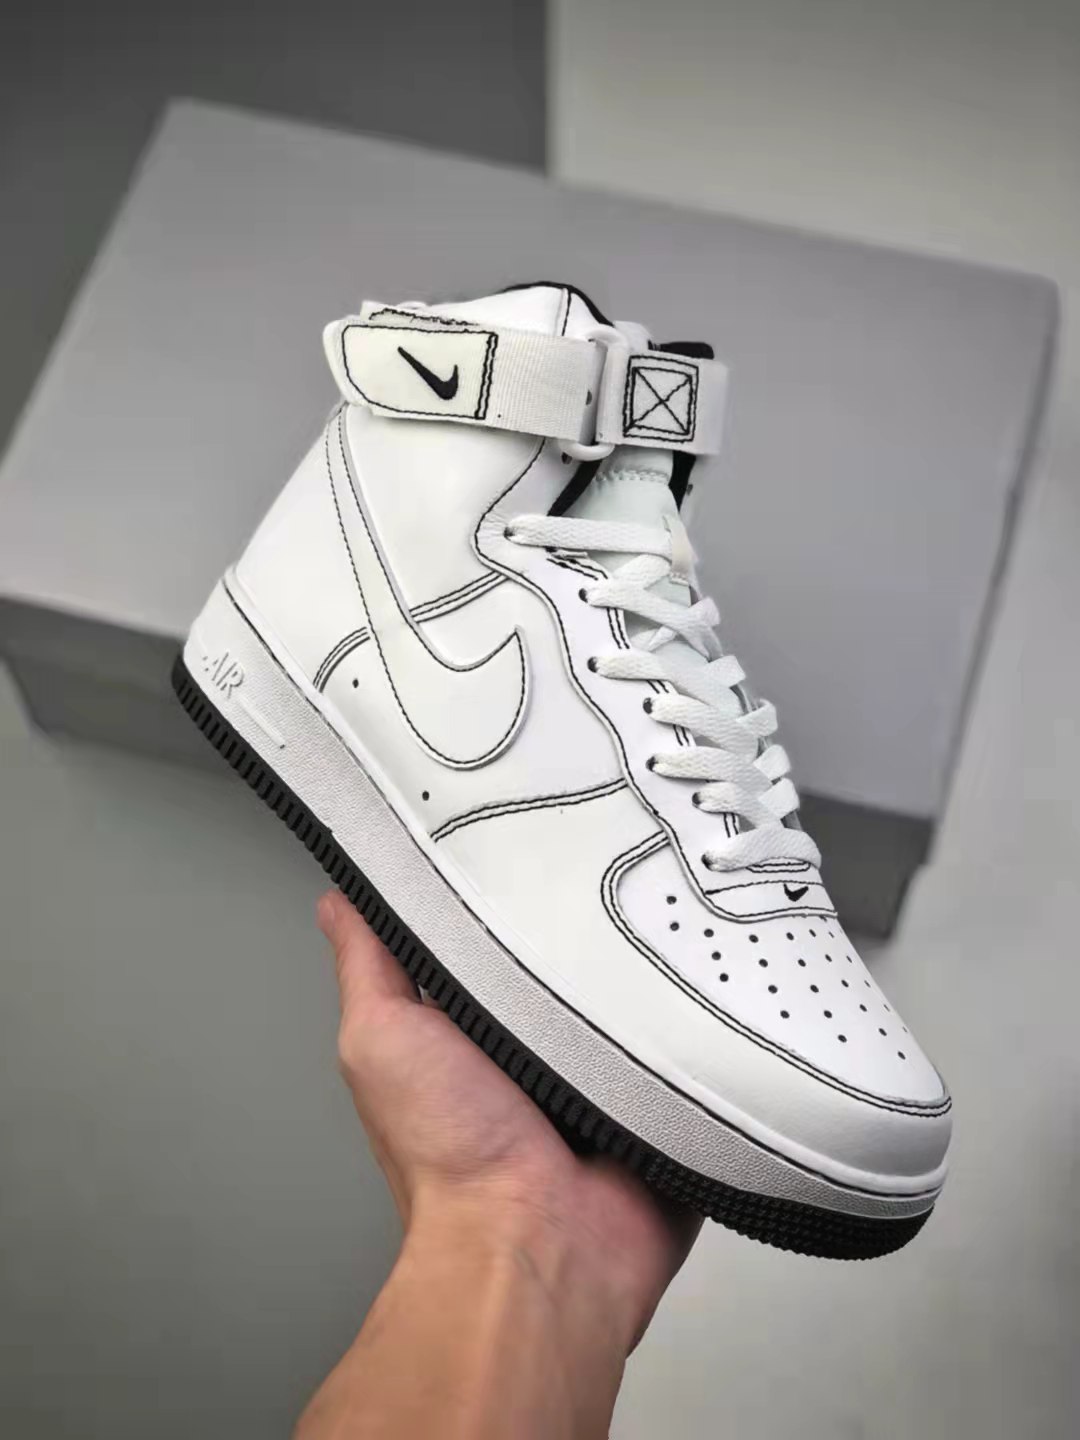 Nike Air Force 1 High 07 White Black CV1753-104 - Iconic Sneakers for Classic Style.